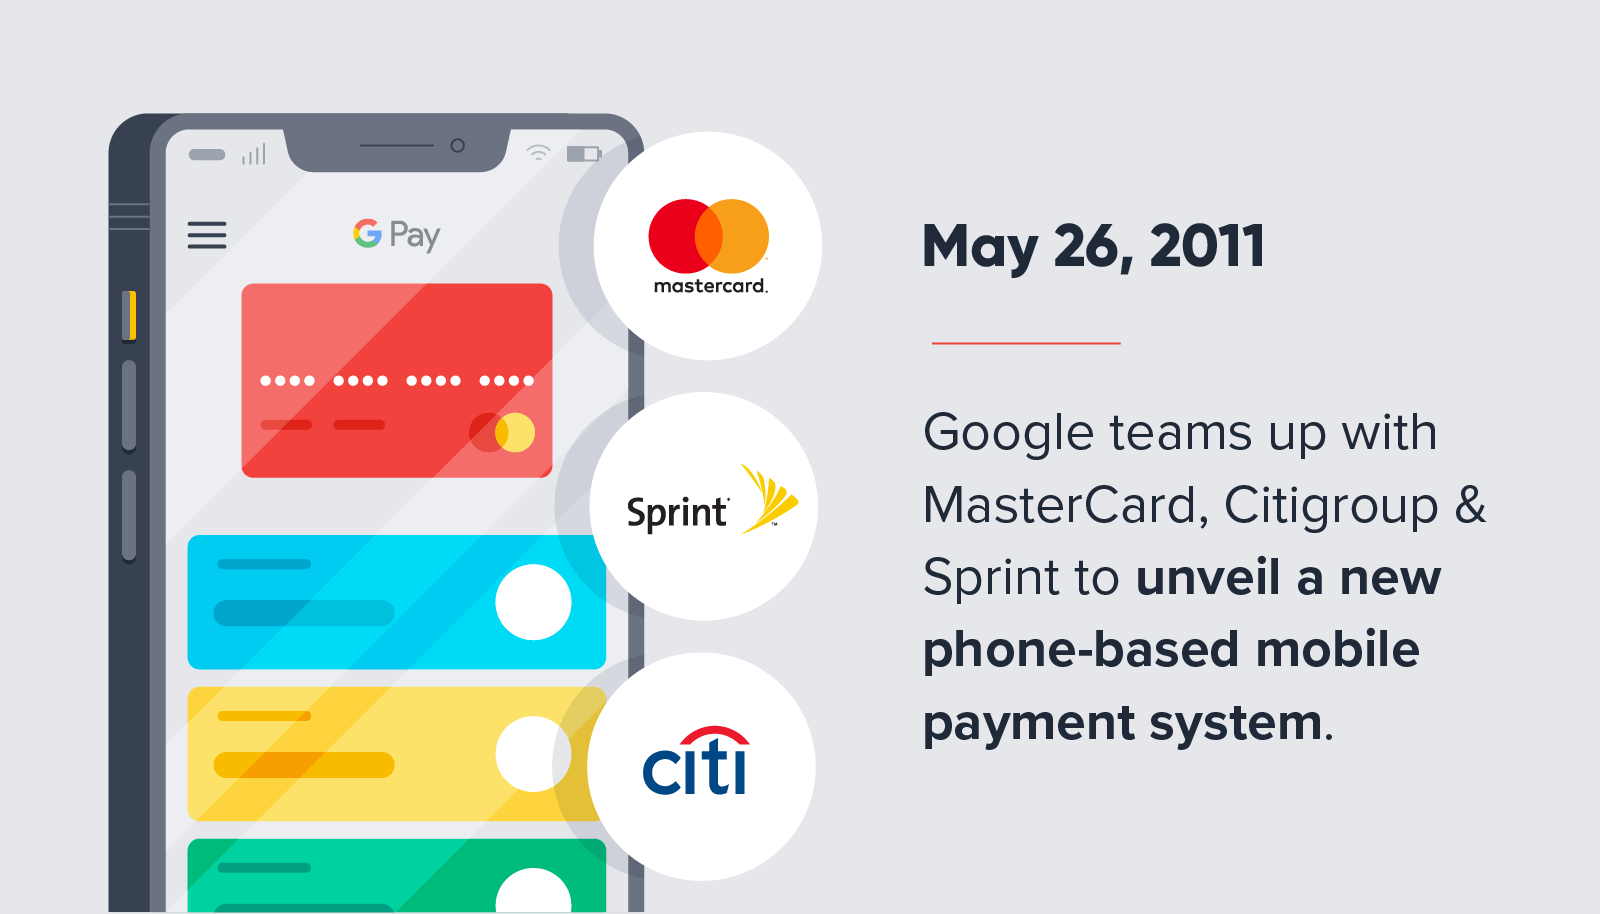 https://clevertap.com/wp-content/uploads/2021/07/new-phone-based-mobile-payment-system.png